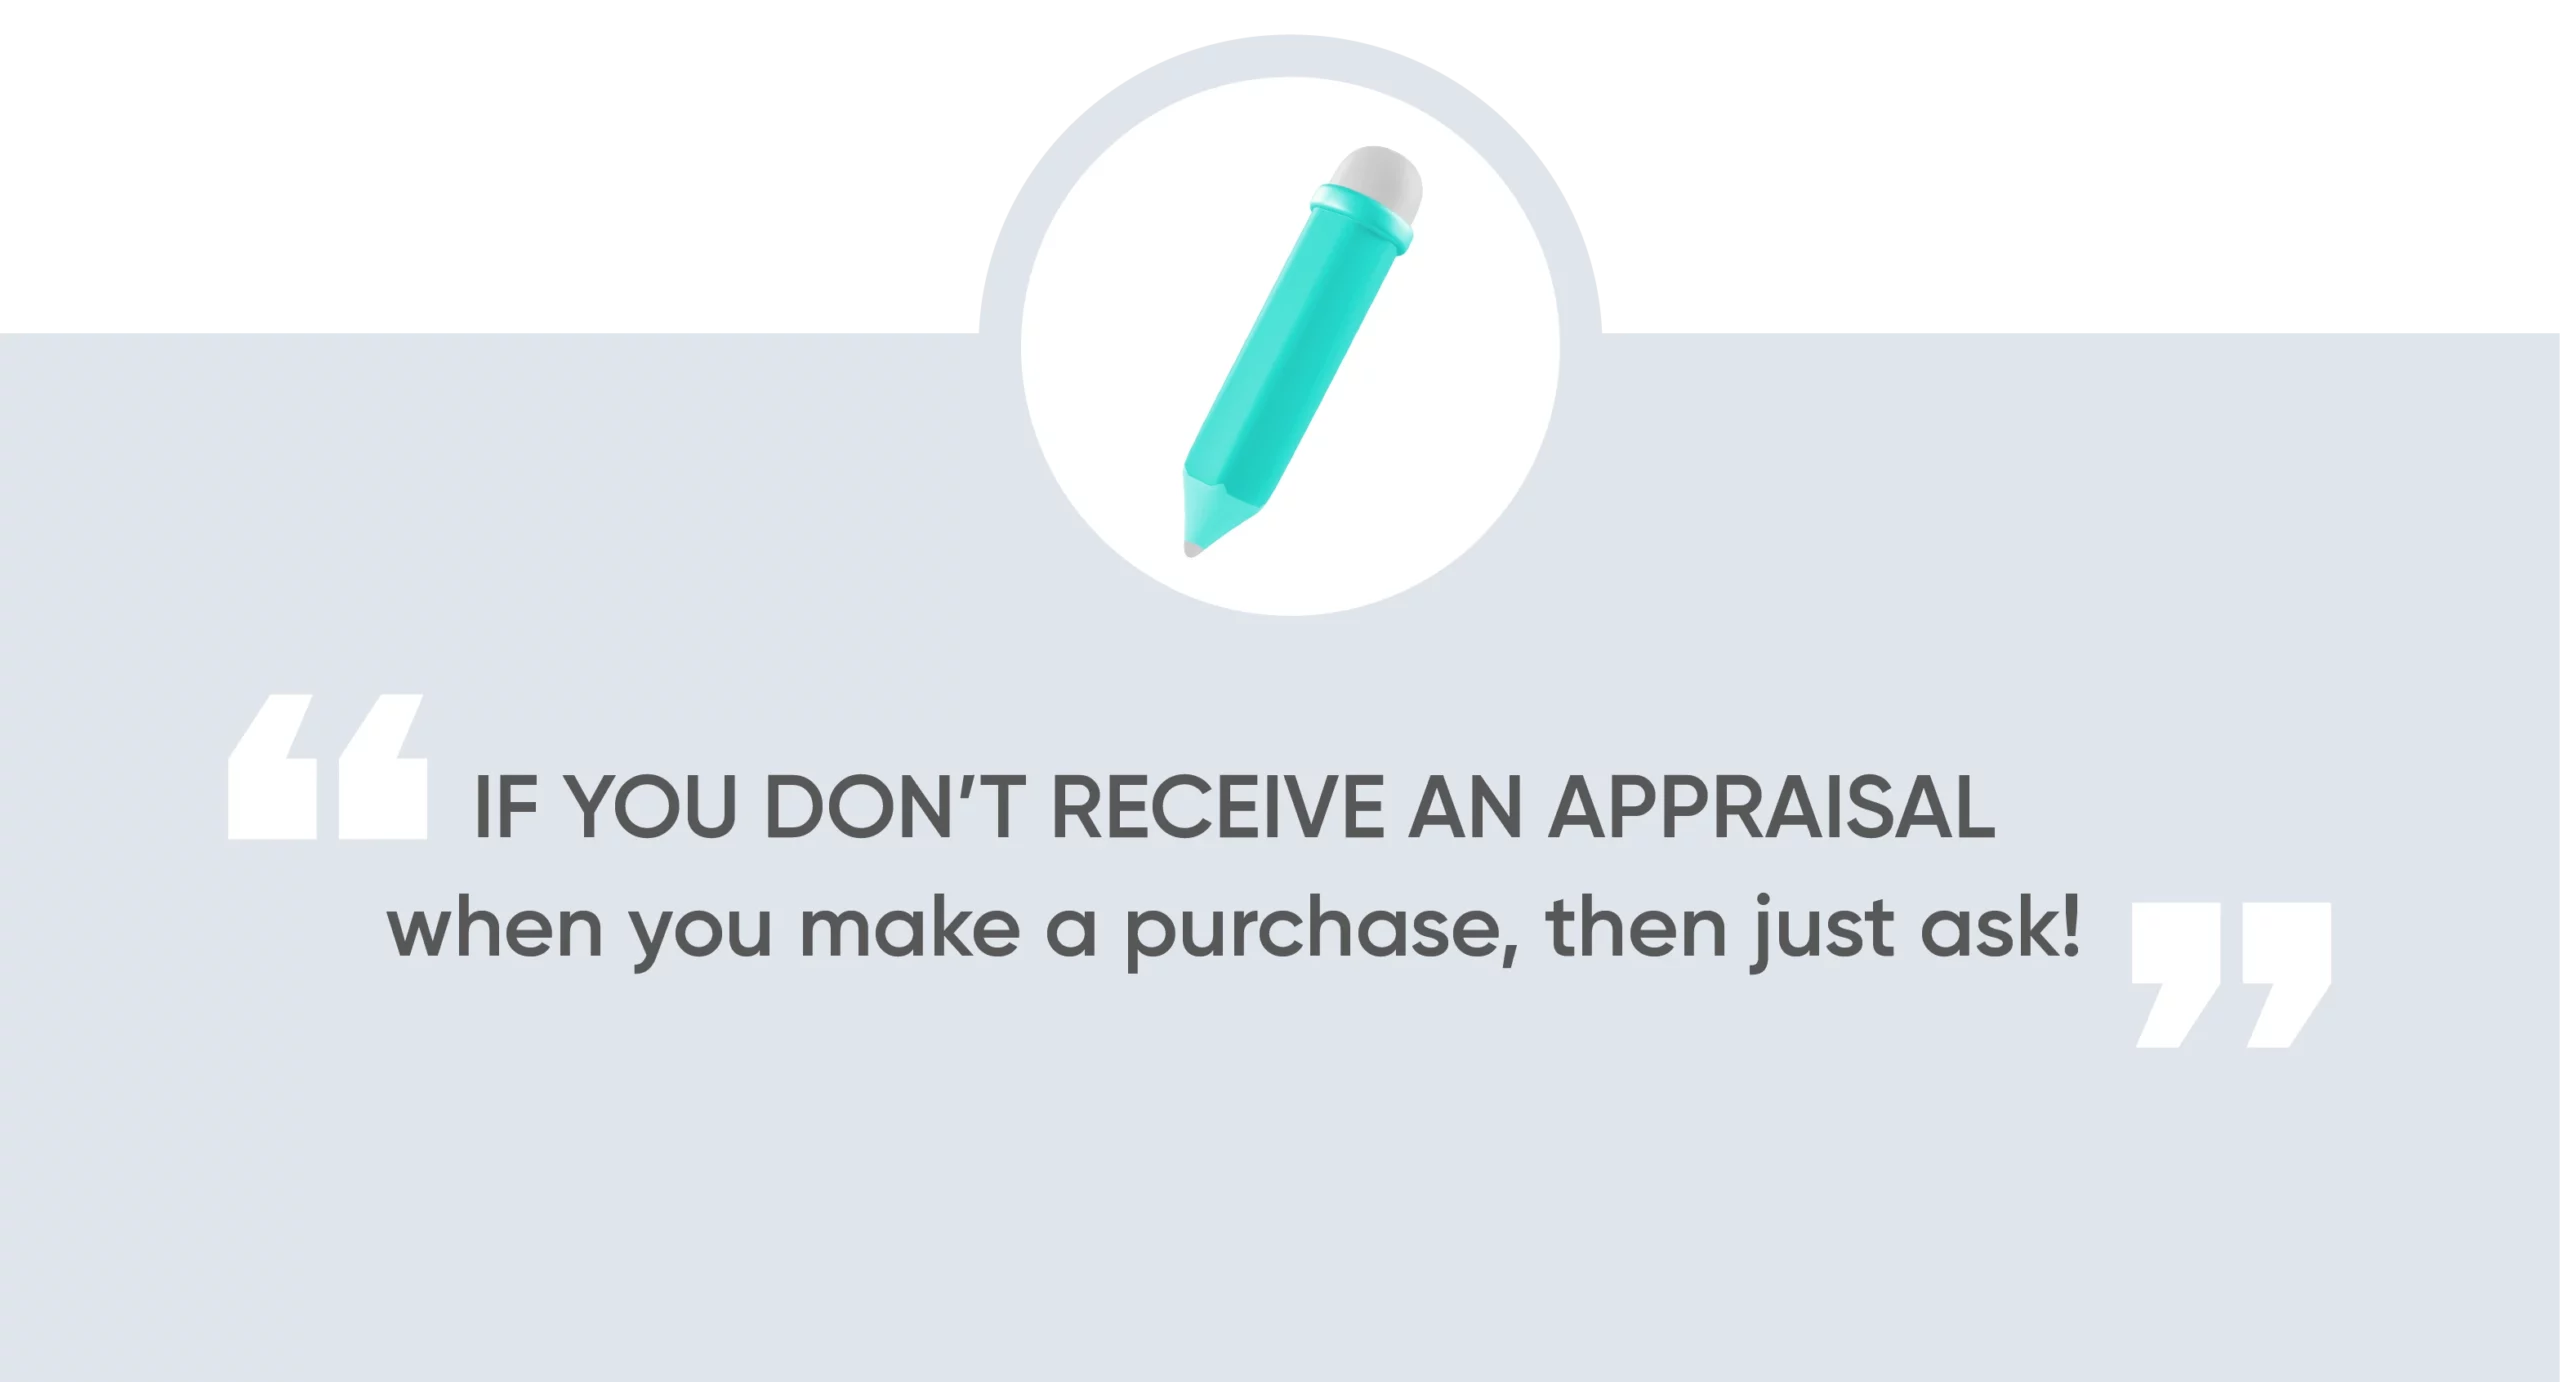 If you don’t receive an appraisal when you make a purchase, then just ask!